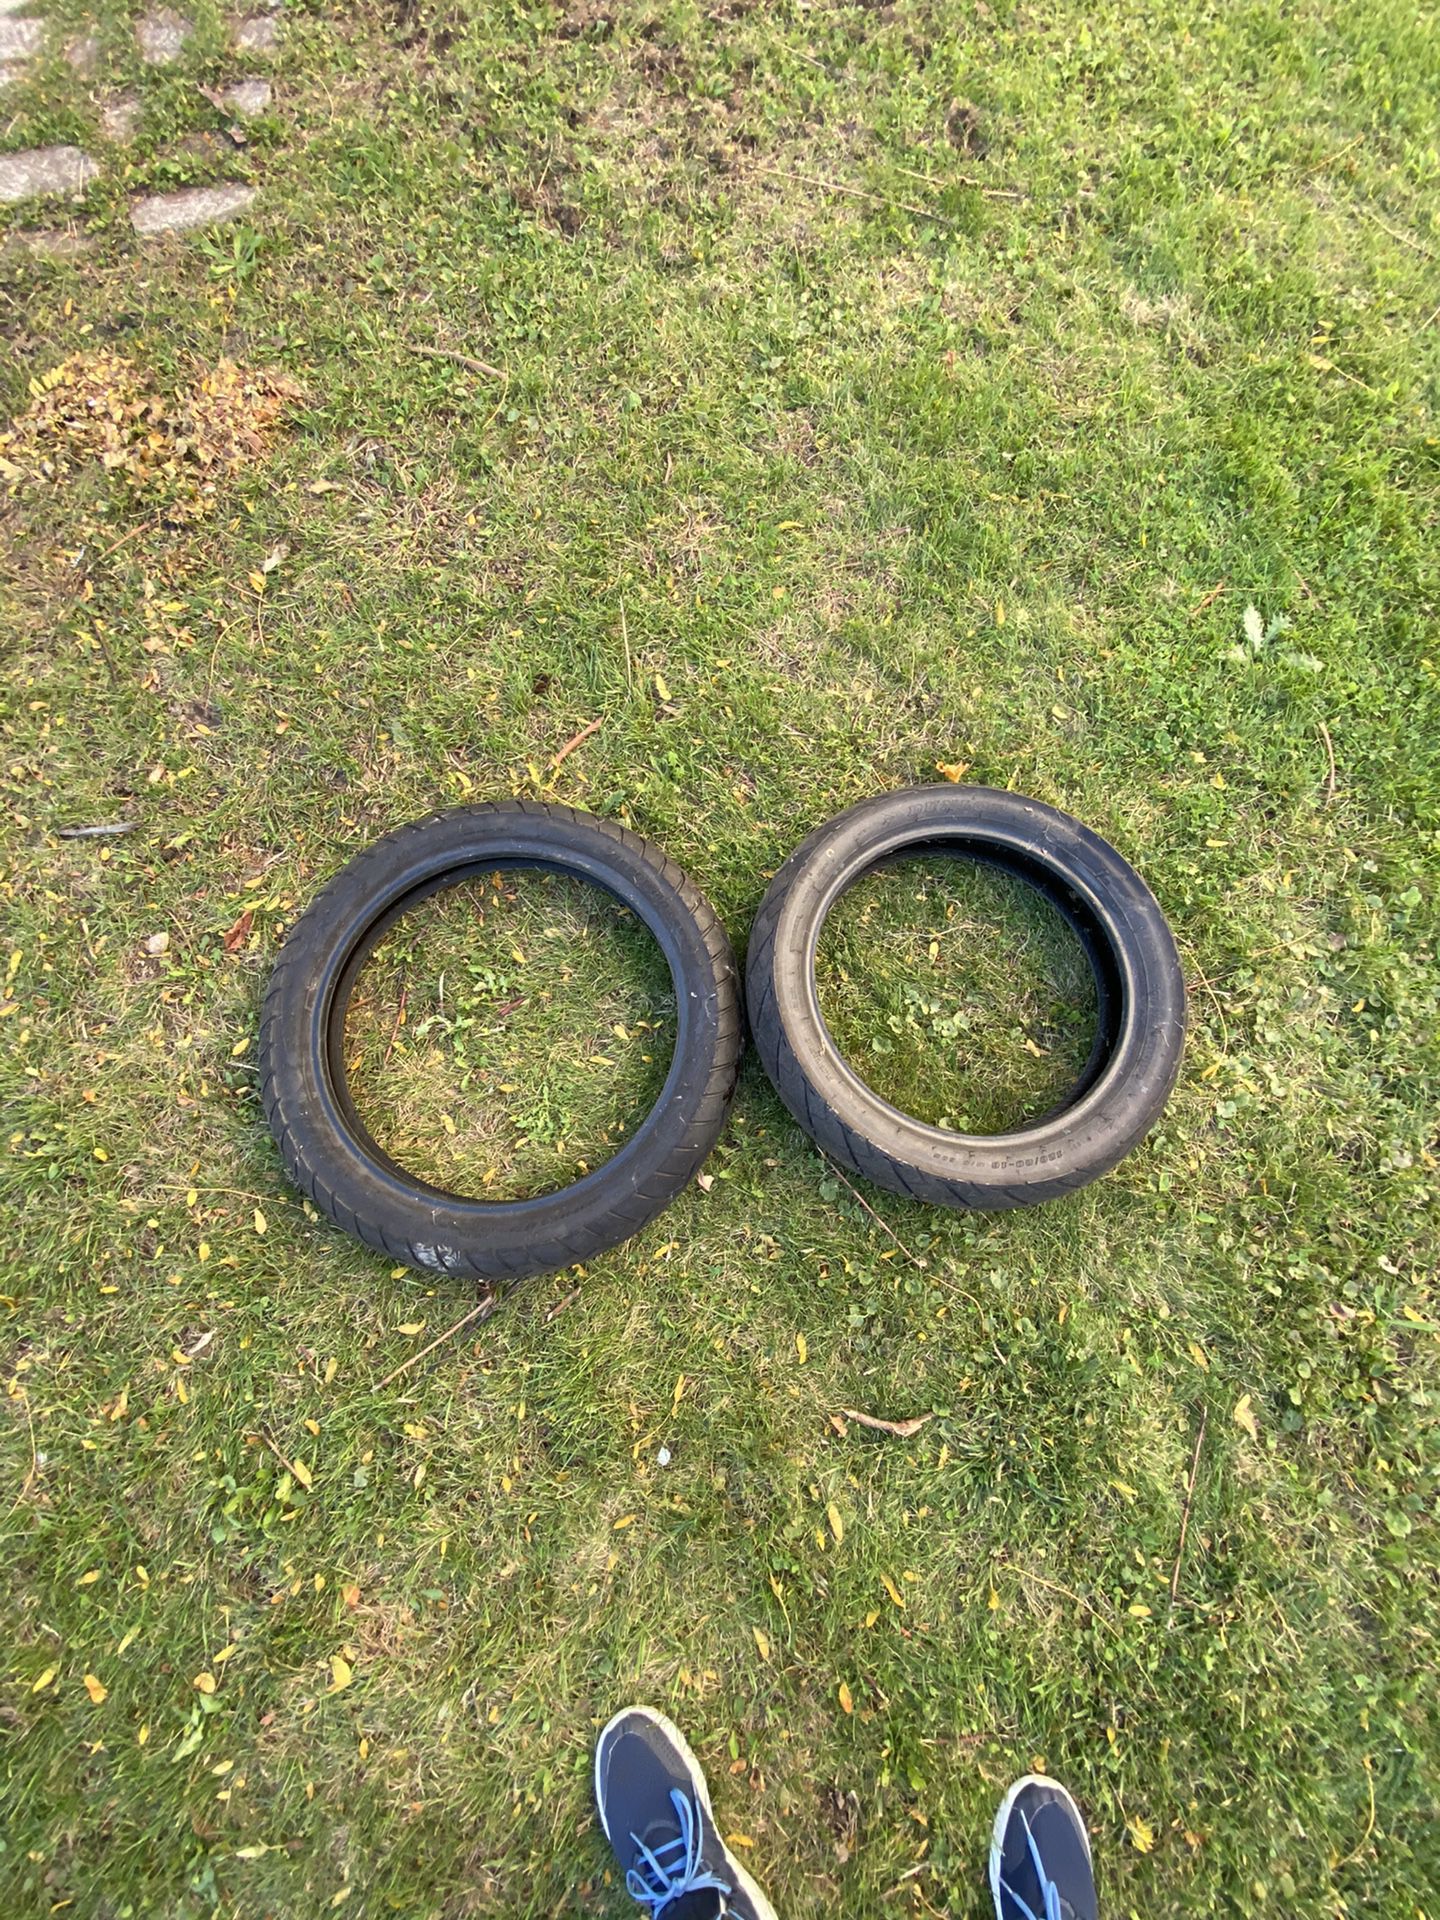 Motorcycle tires was for a Honda nighthawk